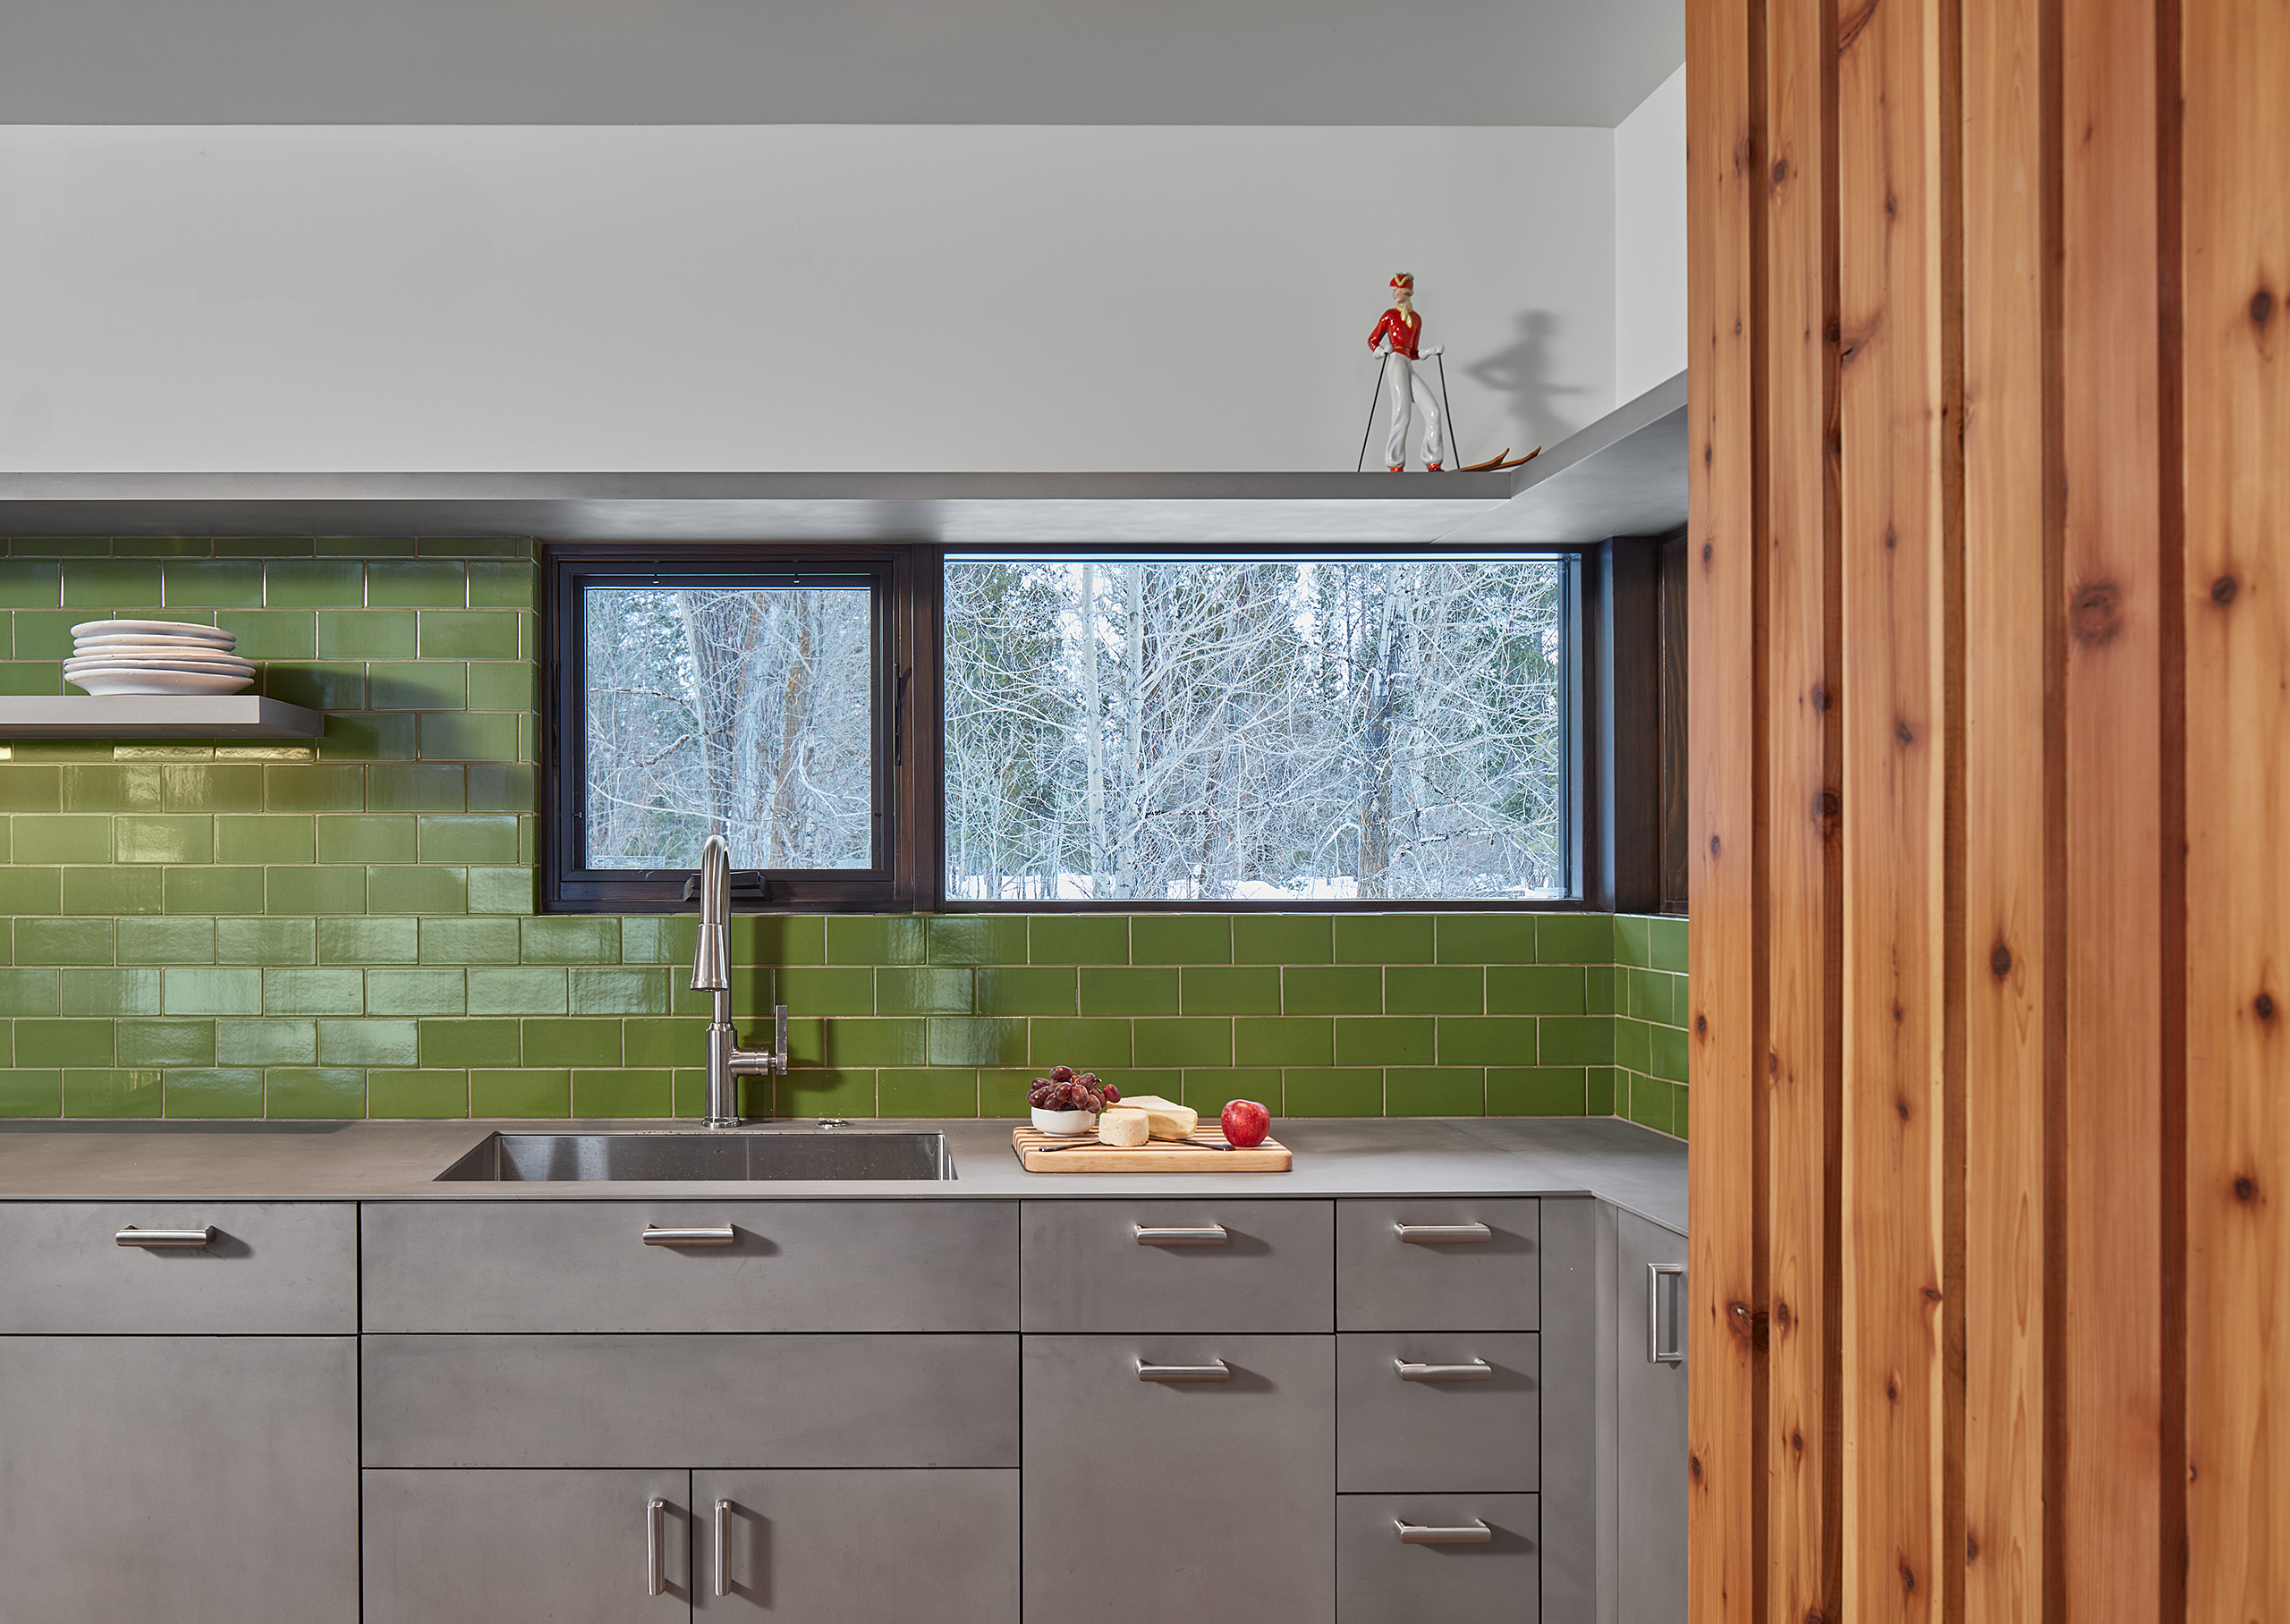 Guest house kitchenette cedar, metal, and green subway tile